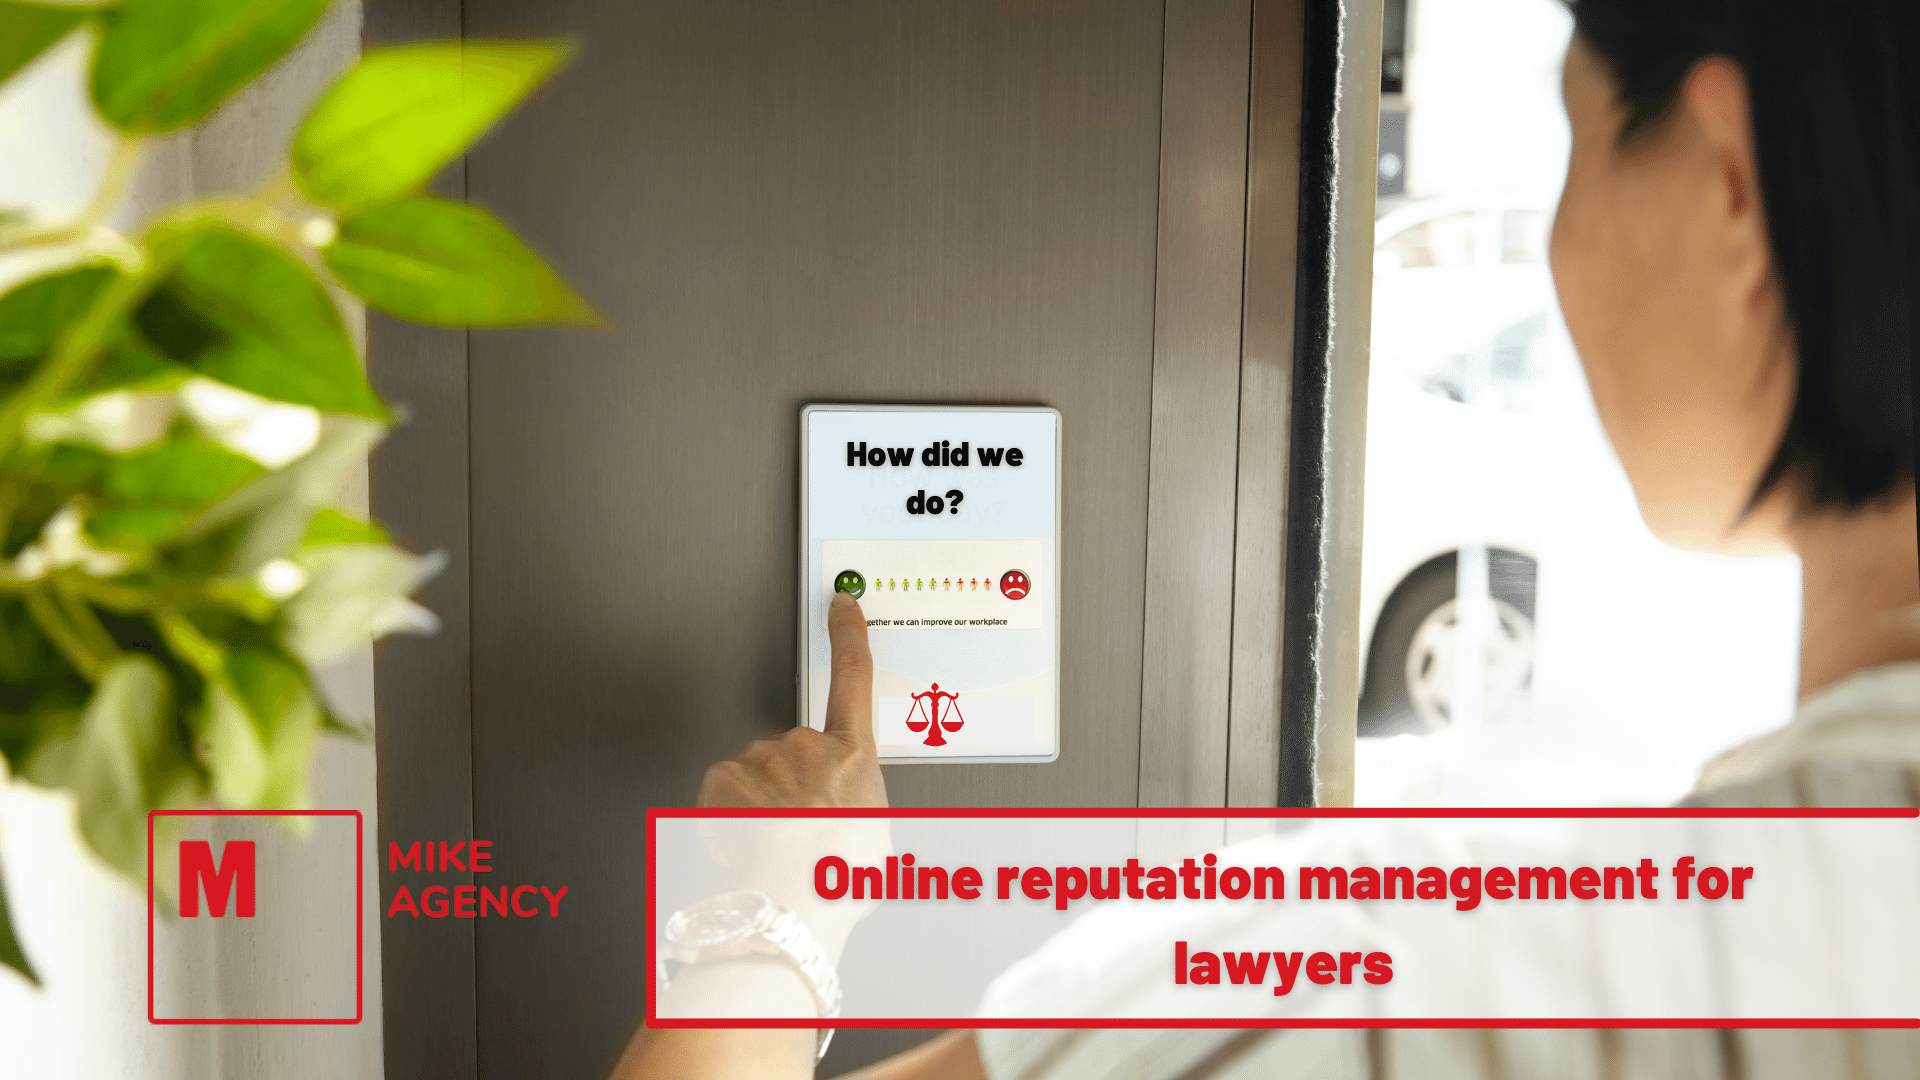 Online reputation management for lawyers: A detailed rundown